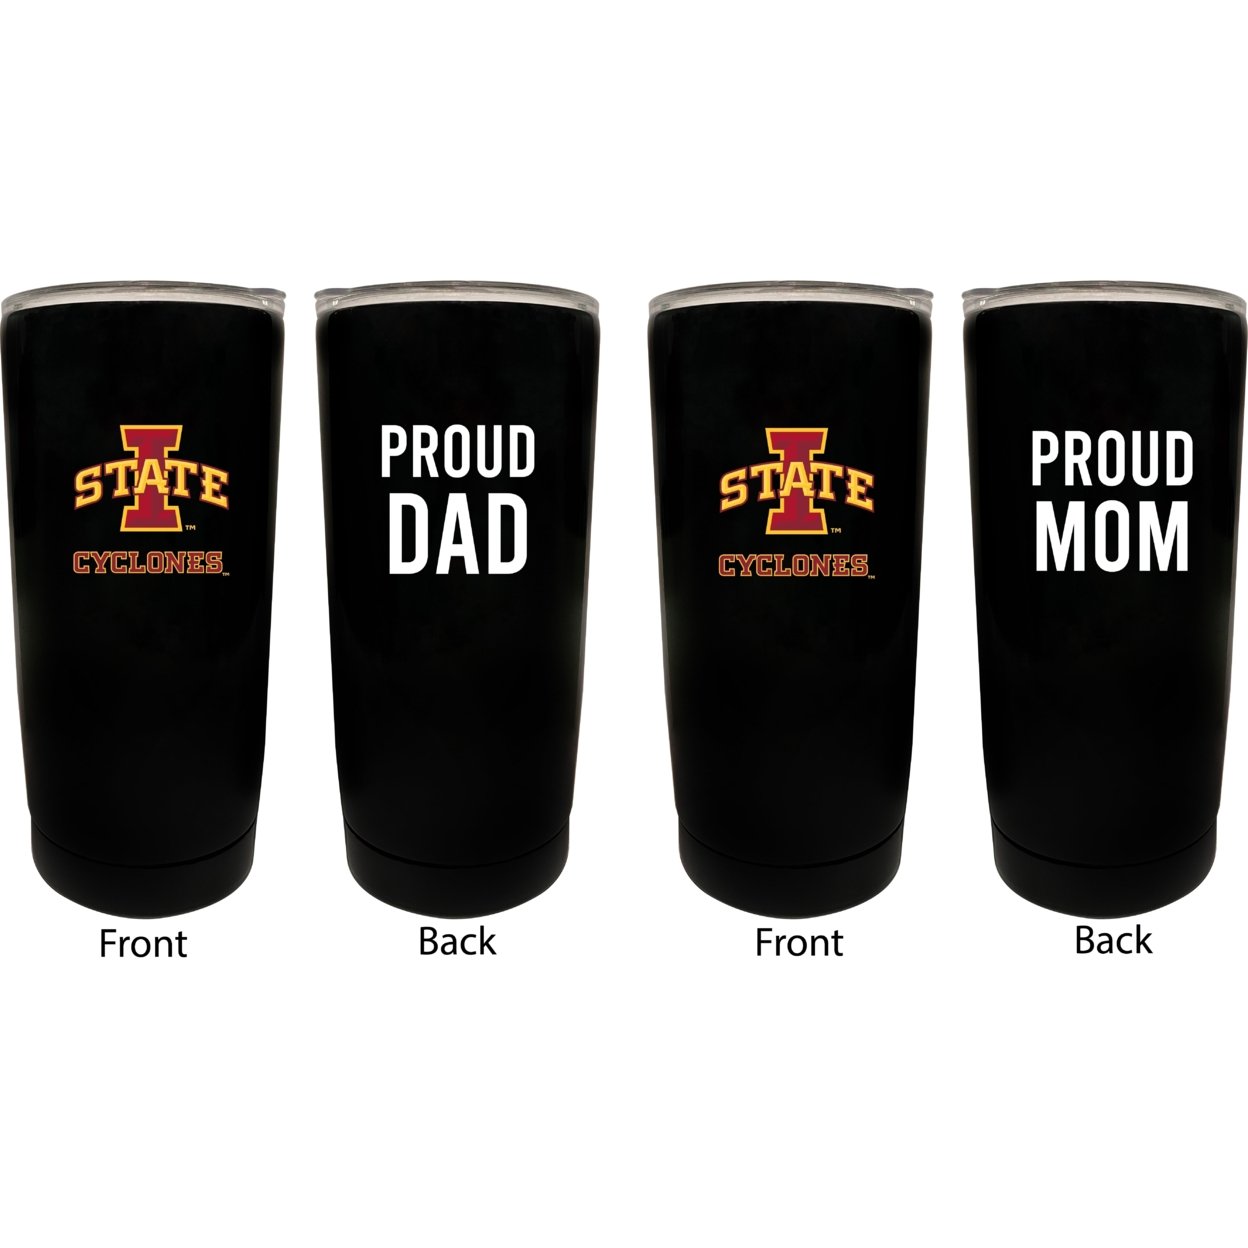 Iowa State Cyclones Proud Mom And Dad 16 Oz Insulated Stainless Steel Tumblers 2 Pack Black.